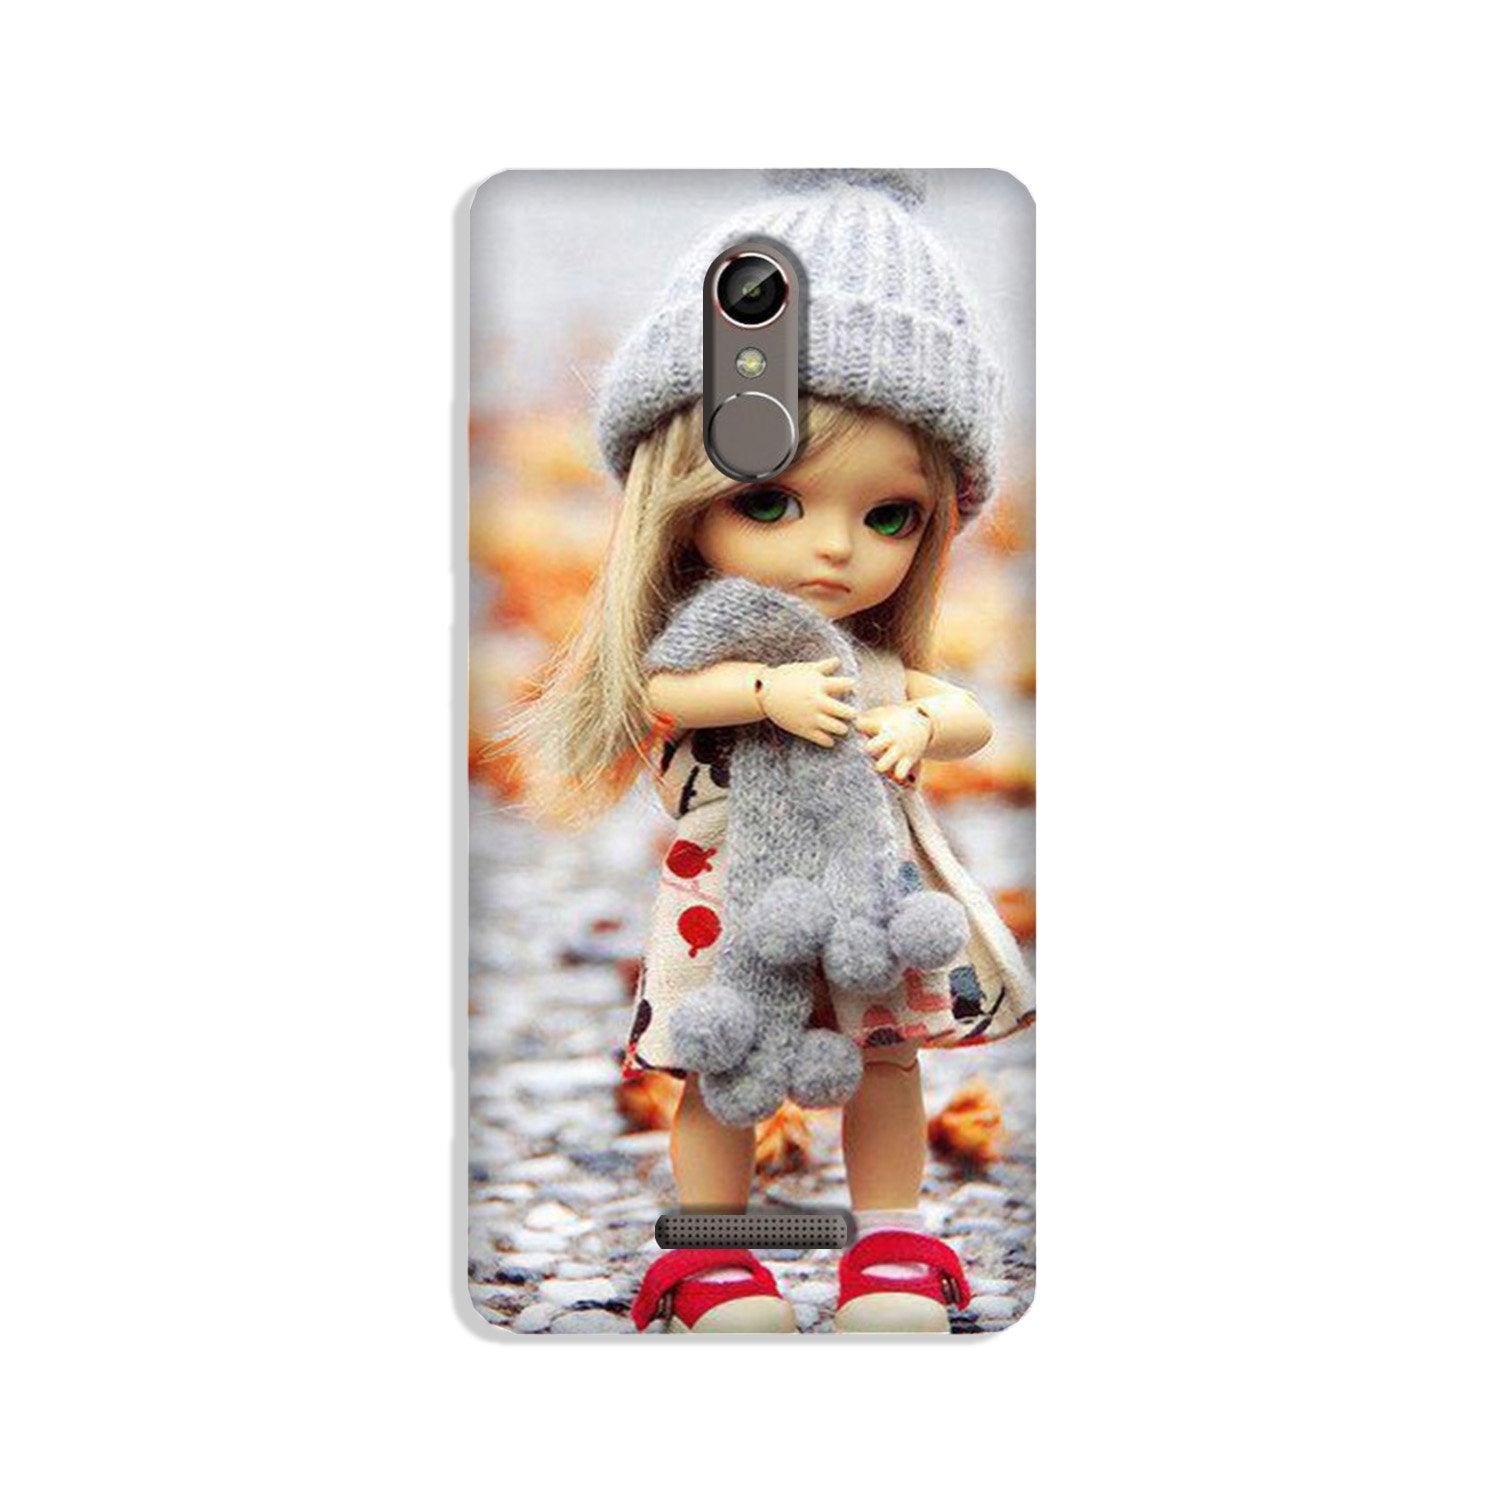 Cute Doll Case for Gionee S6s